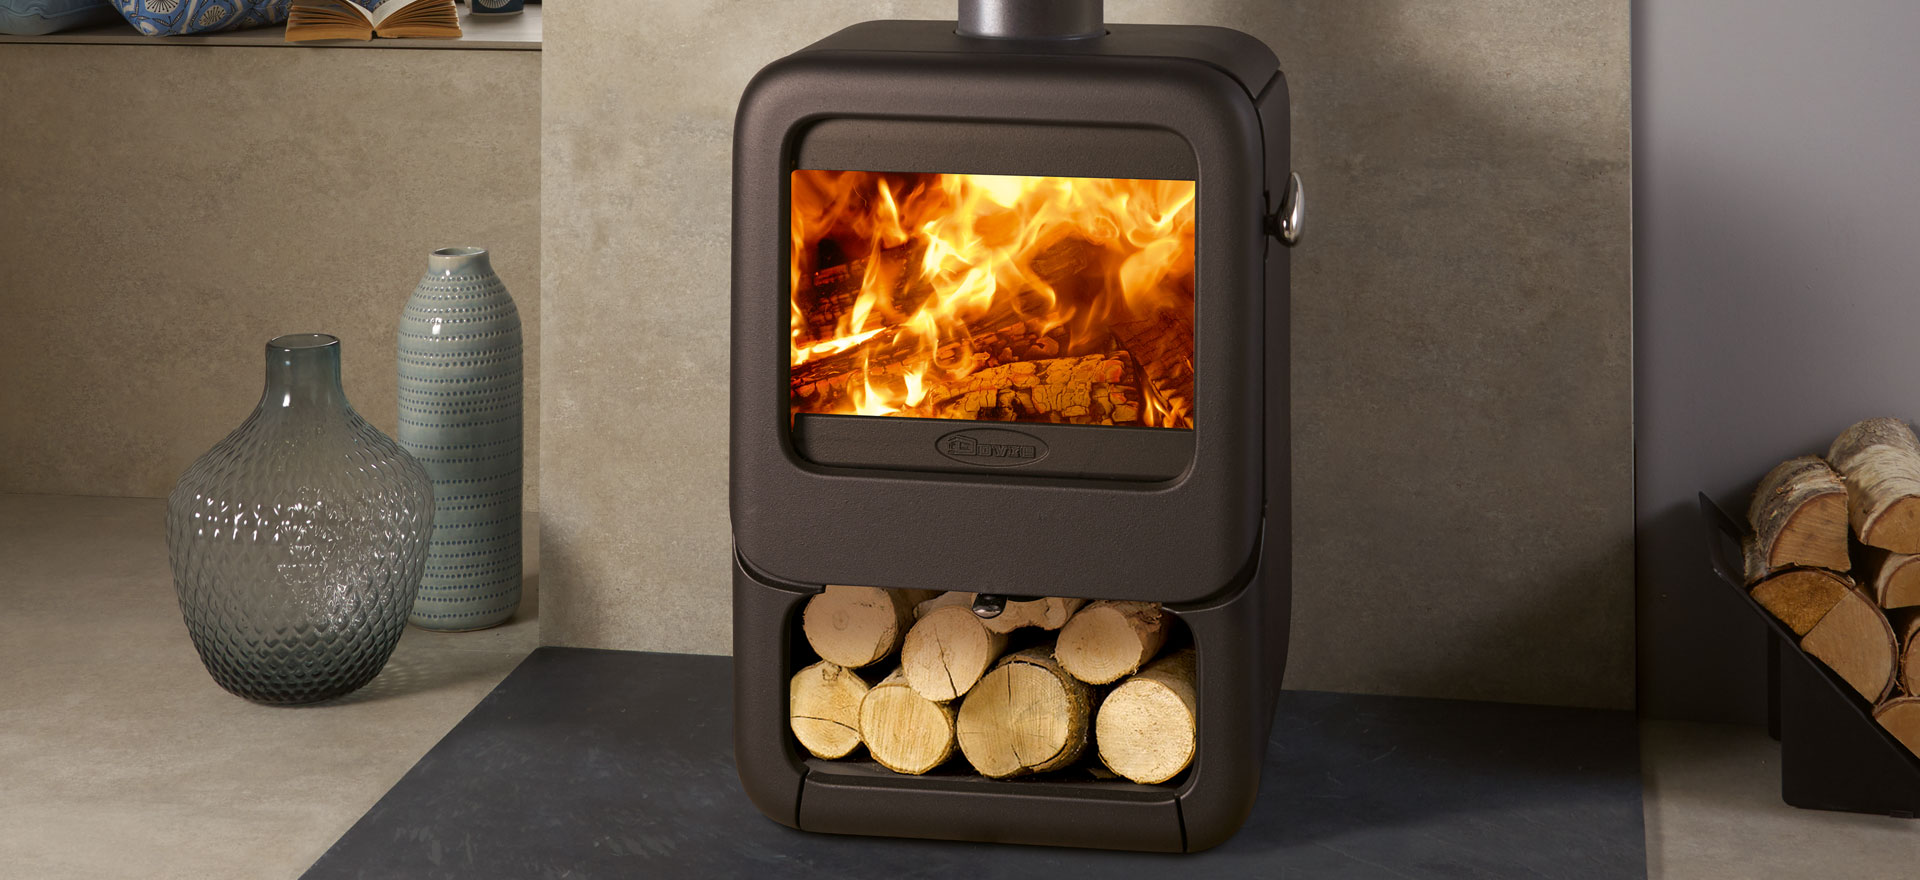 Choosing a contemporary wood burning stove for your home